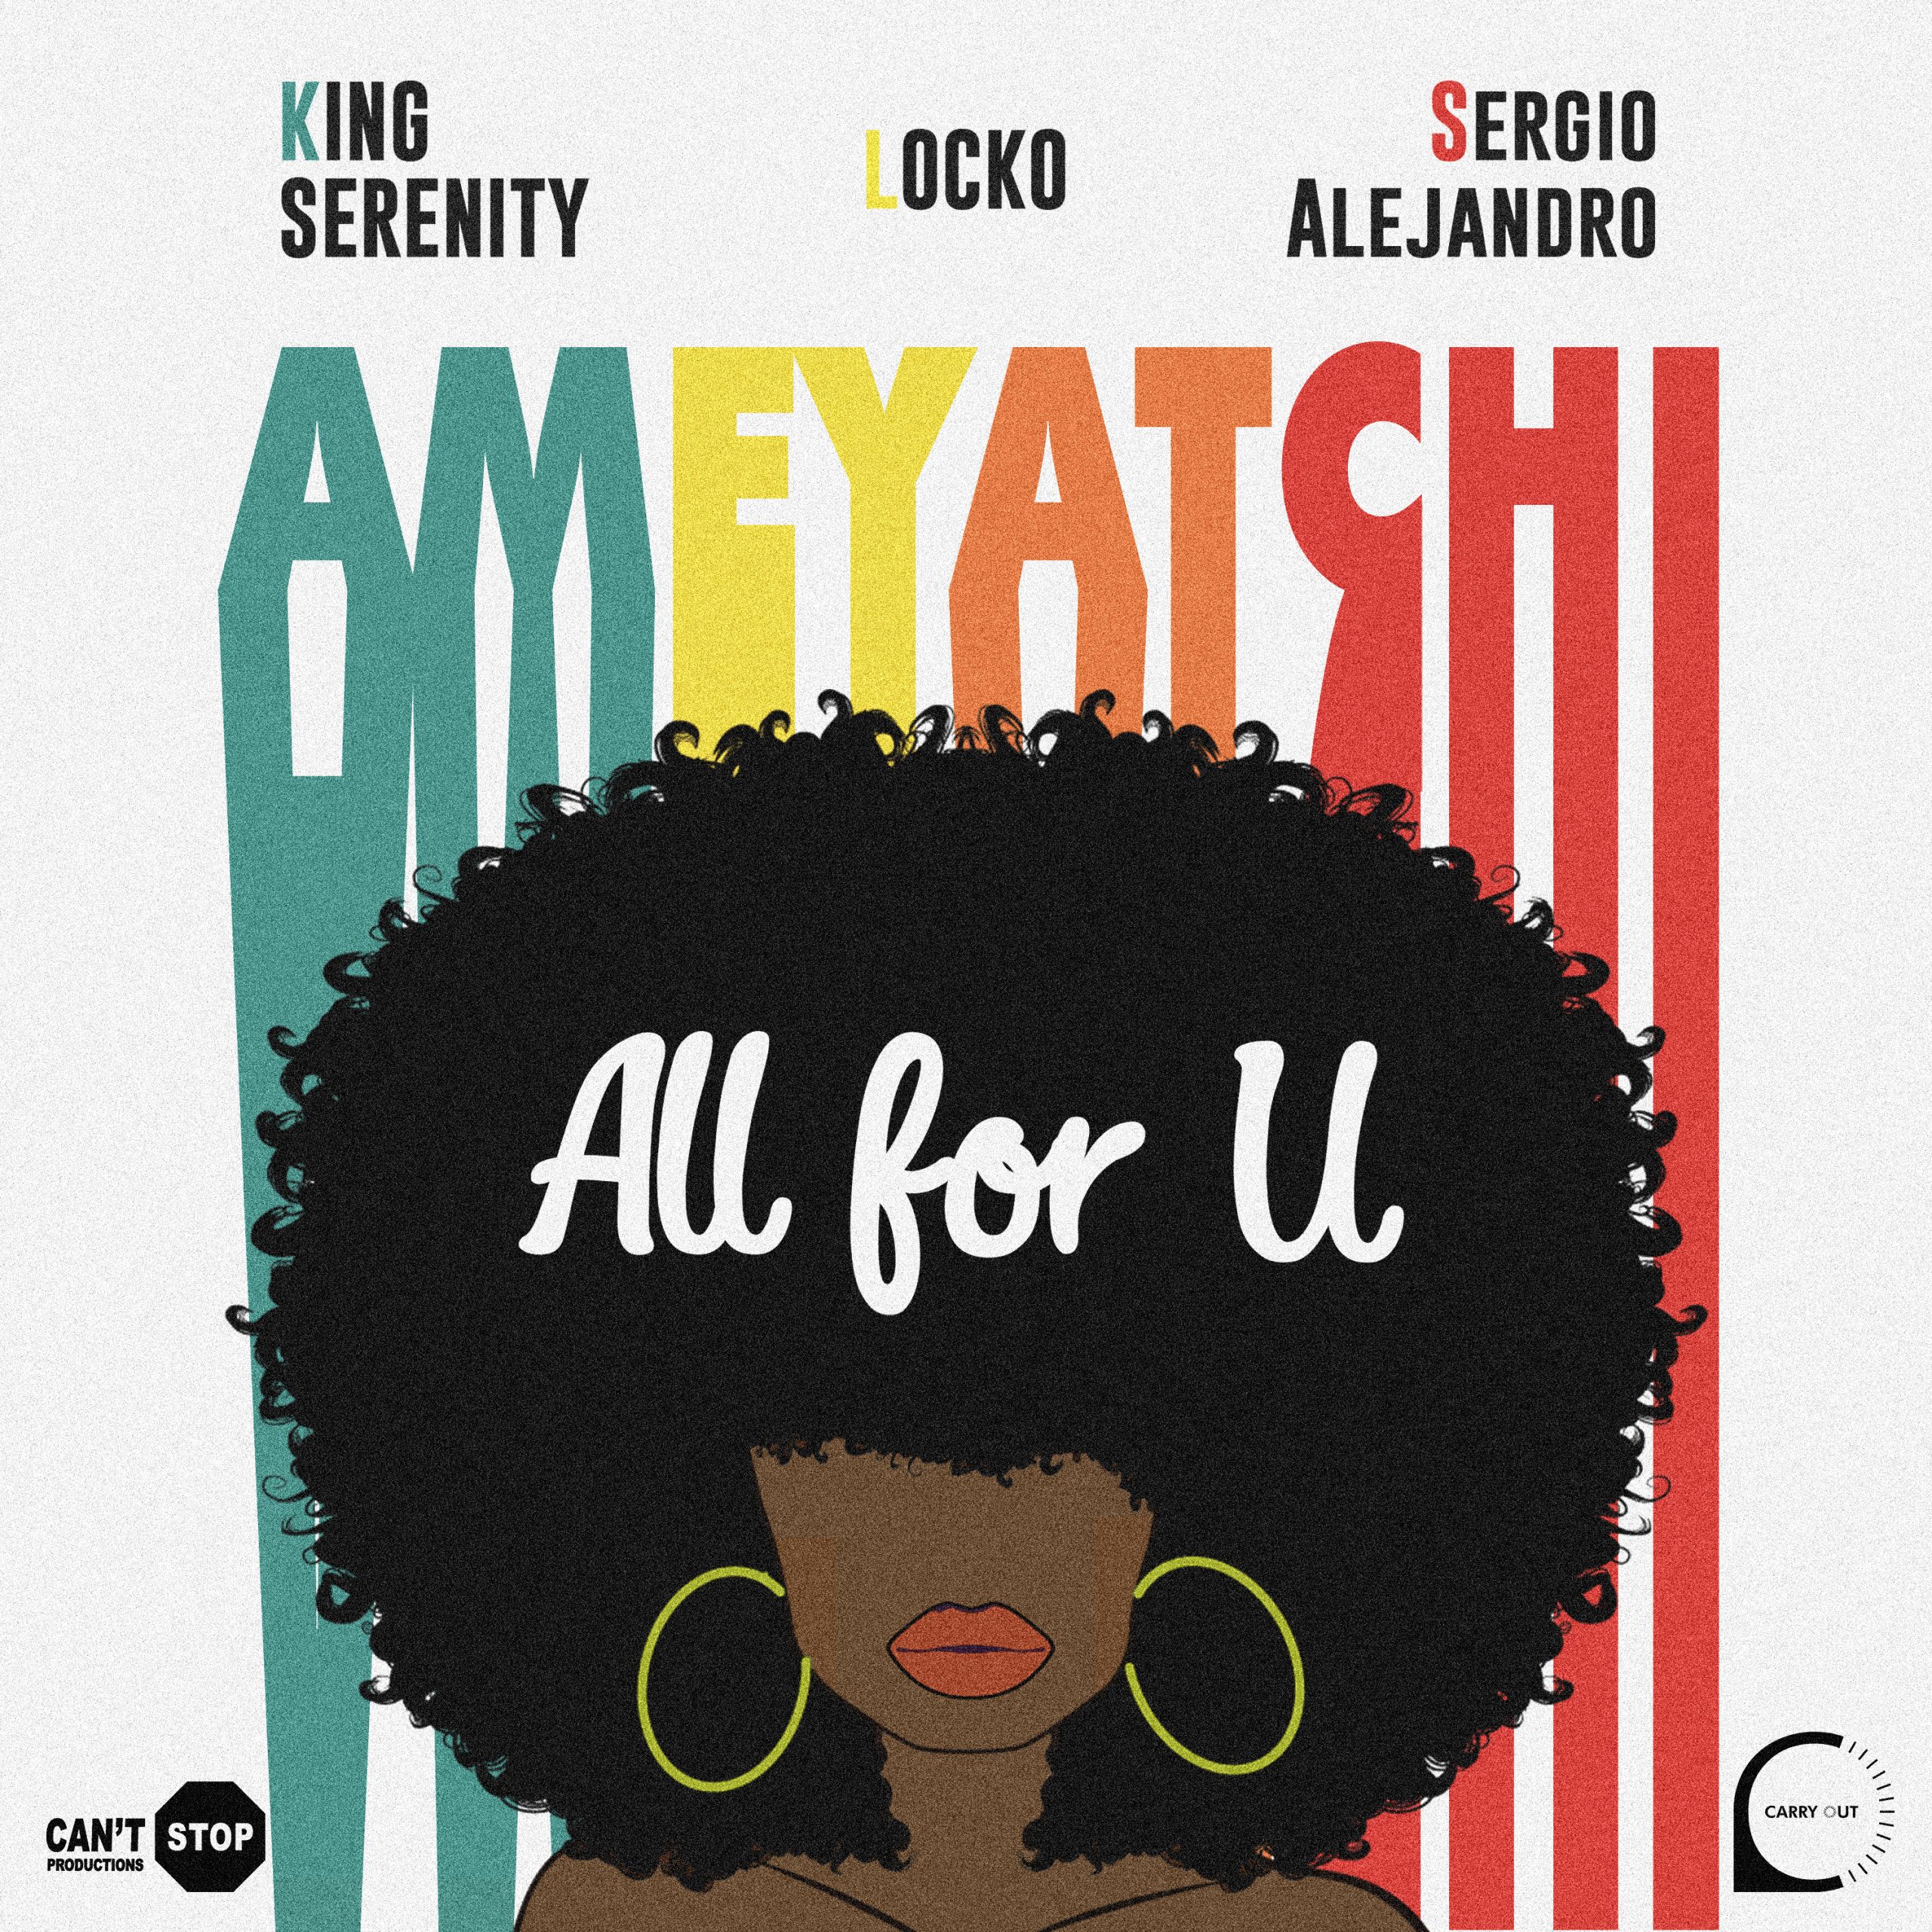 You are currently viewing SuperNova: King Serenity x Locko x Sergio Alejandro – All For U (Ameyatchi) (26.07)